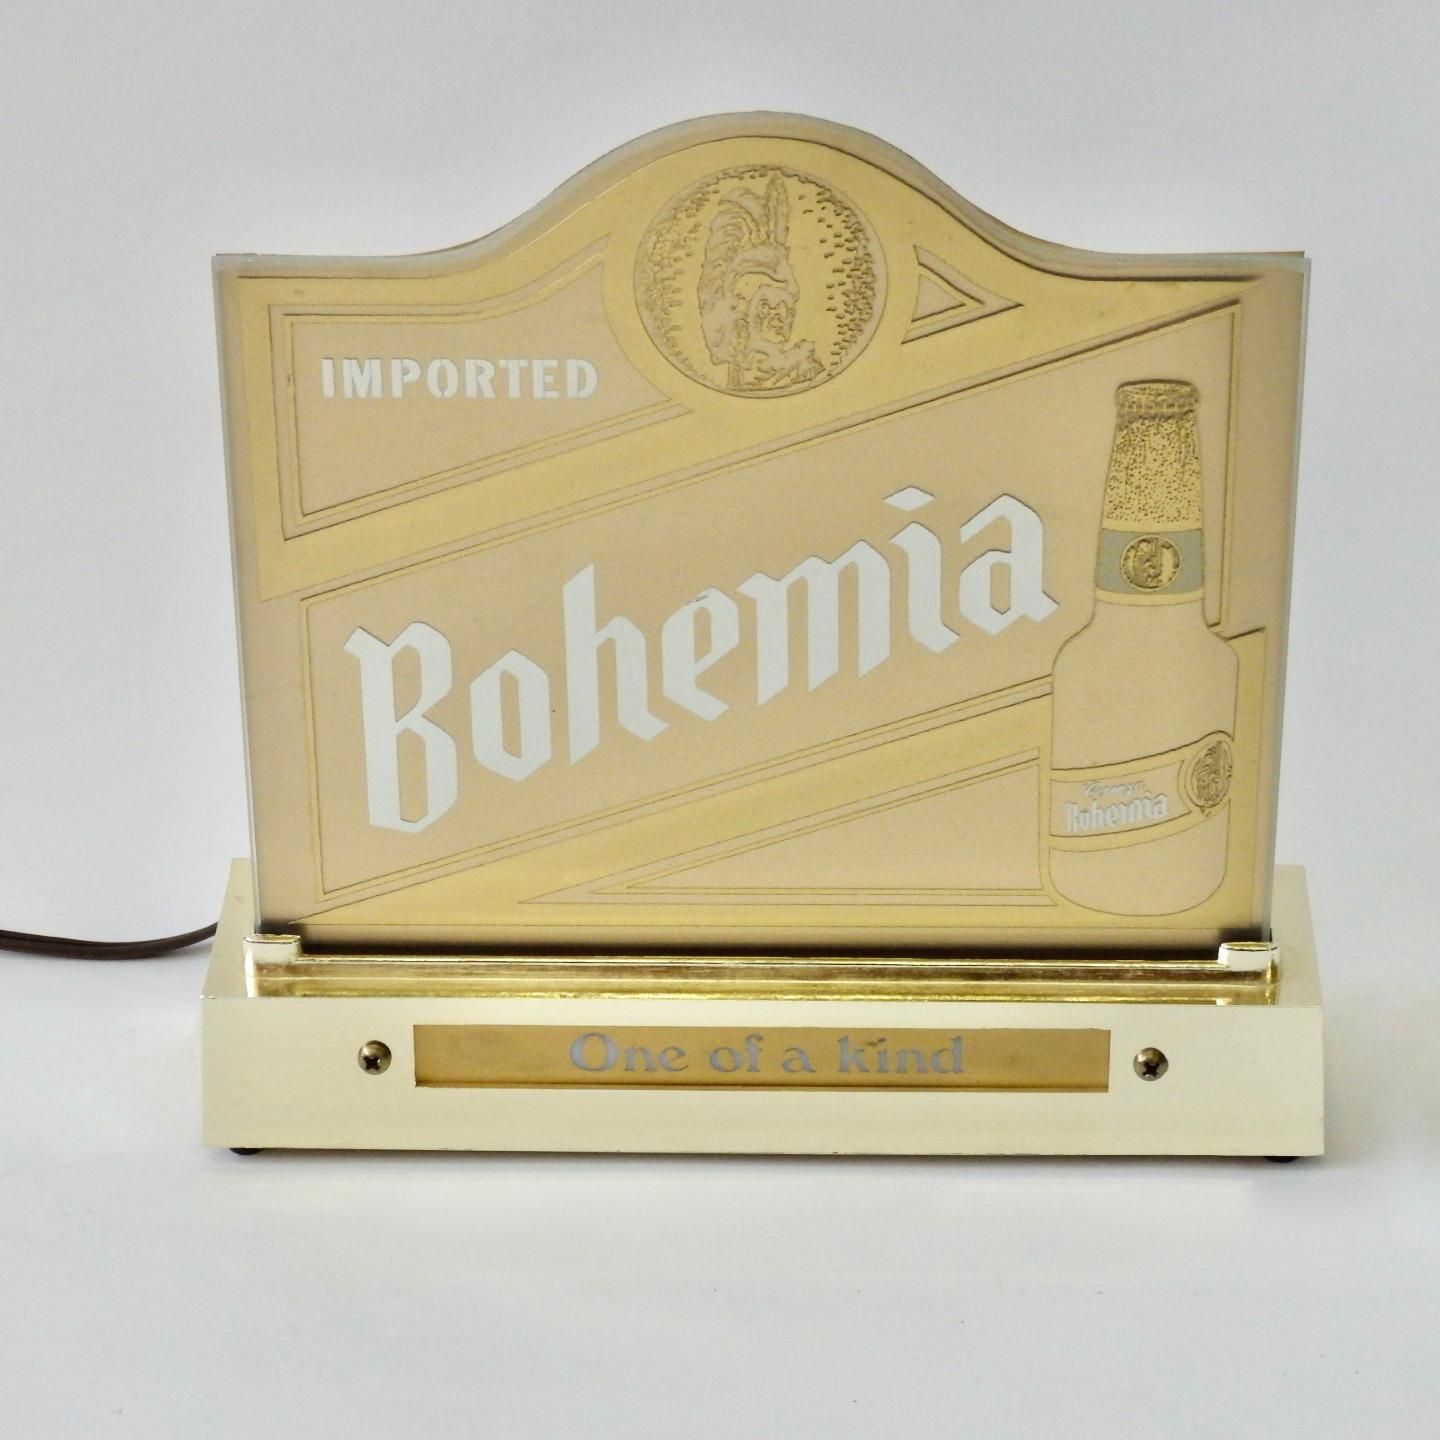 Excellent possibly un-used condition. Brass tone base holds reverse painted glass with Bohemia logo.